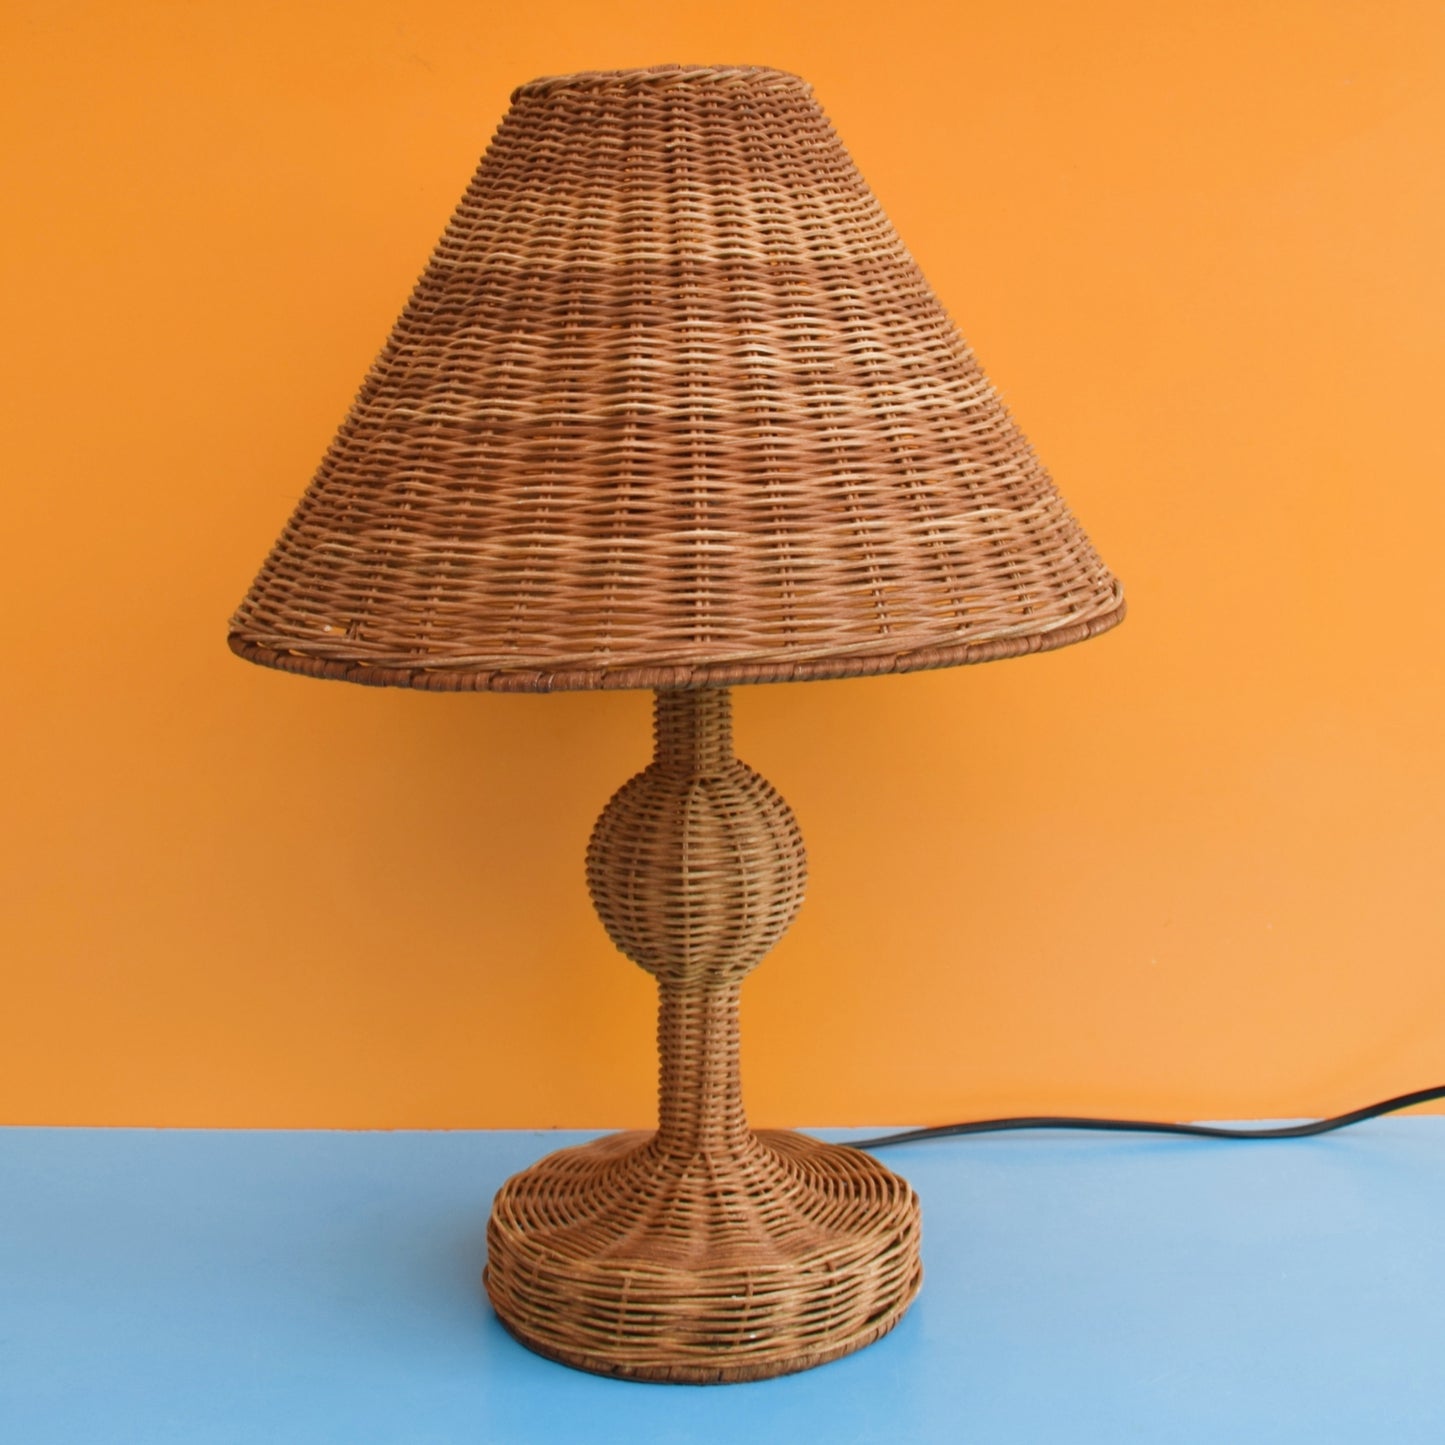 Vintage 1990s Wicker Table Lamp & Shade